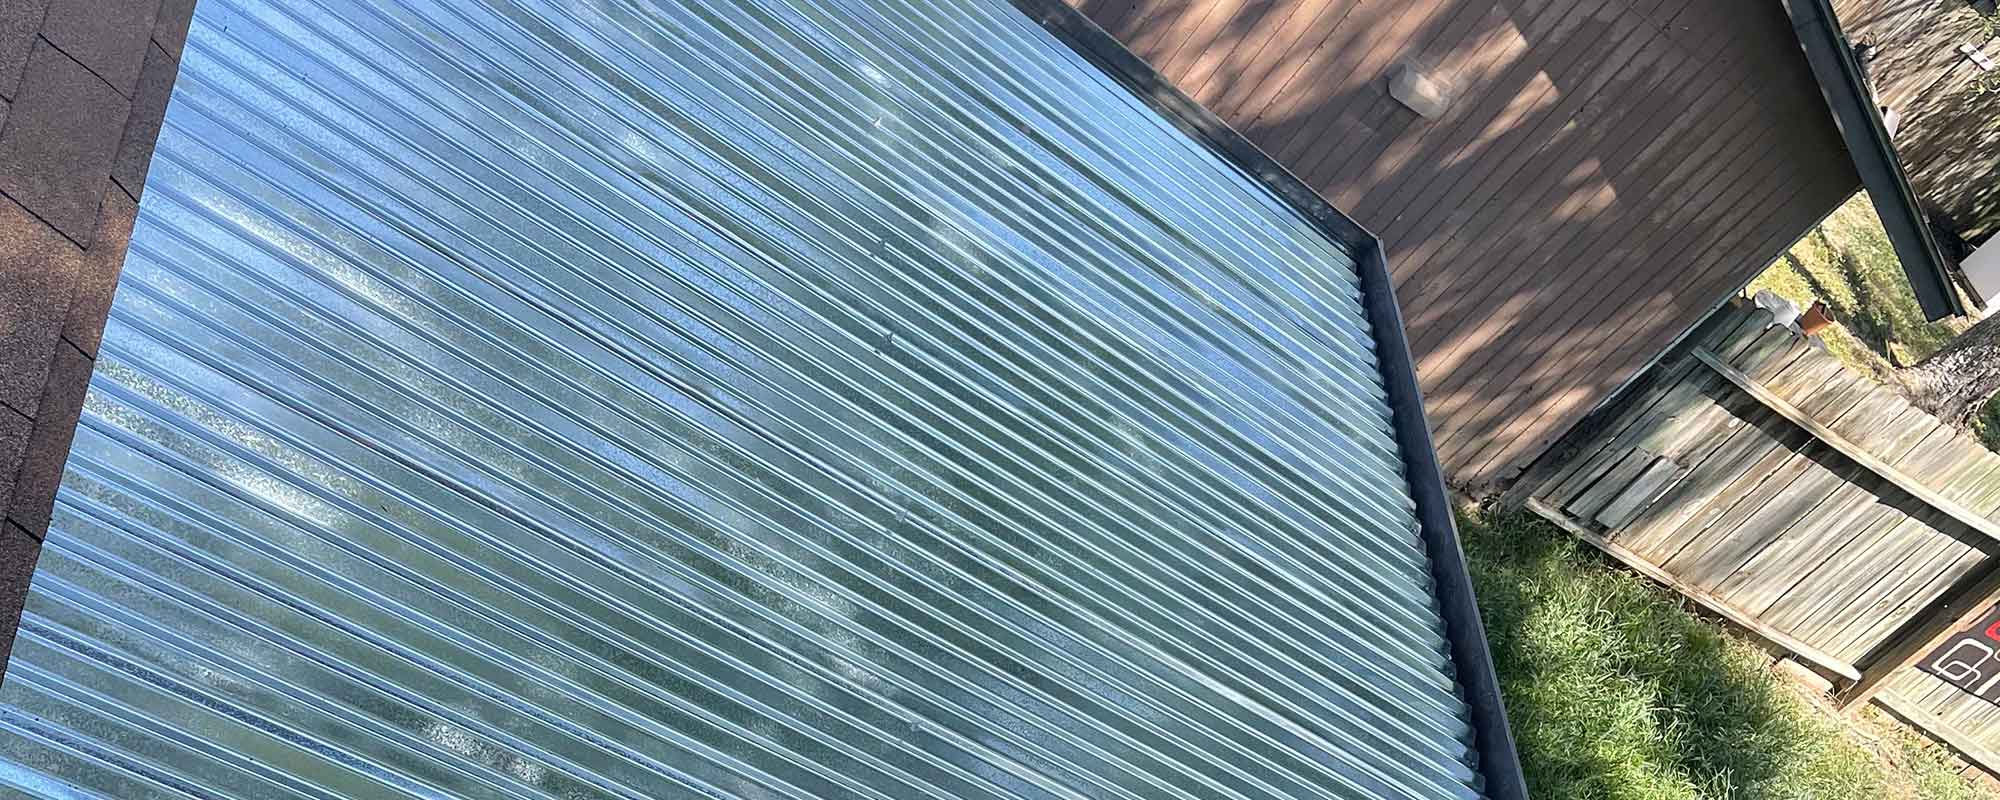 why corrugated roofing panels are wavy